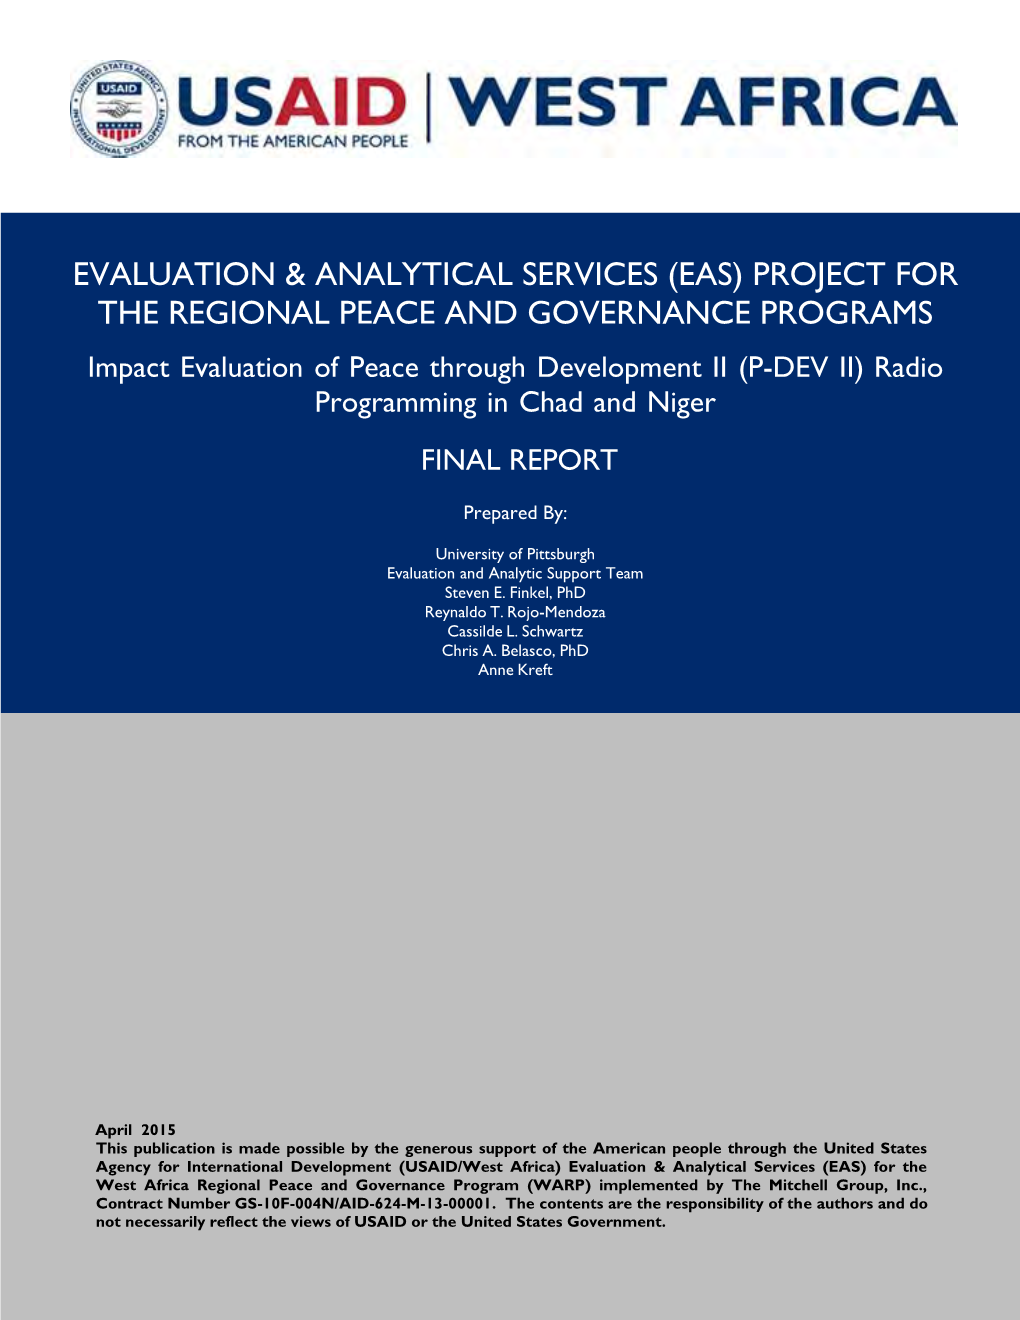 Eas) Project for the Regional Peace and Governance Programs